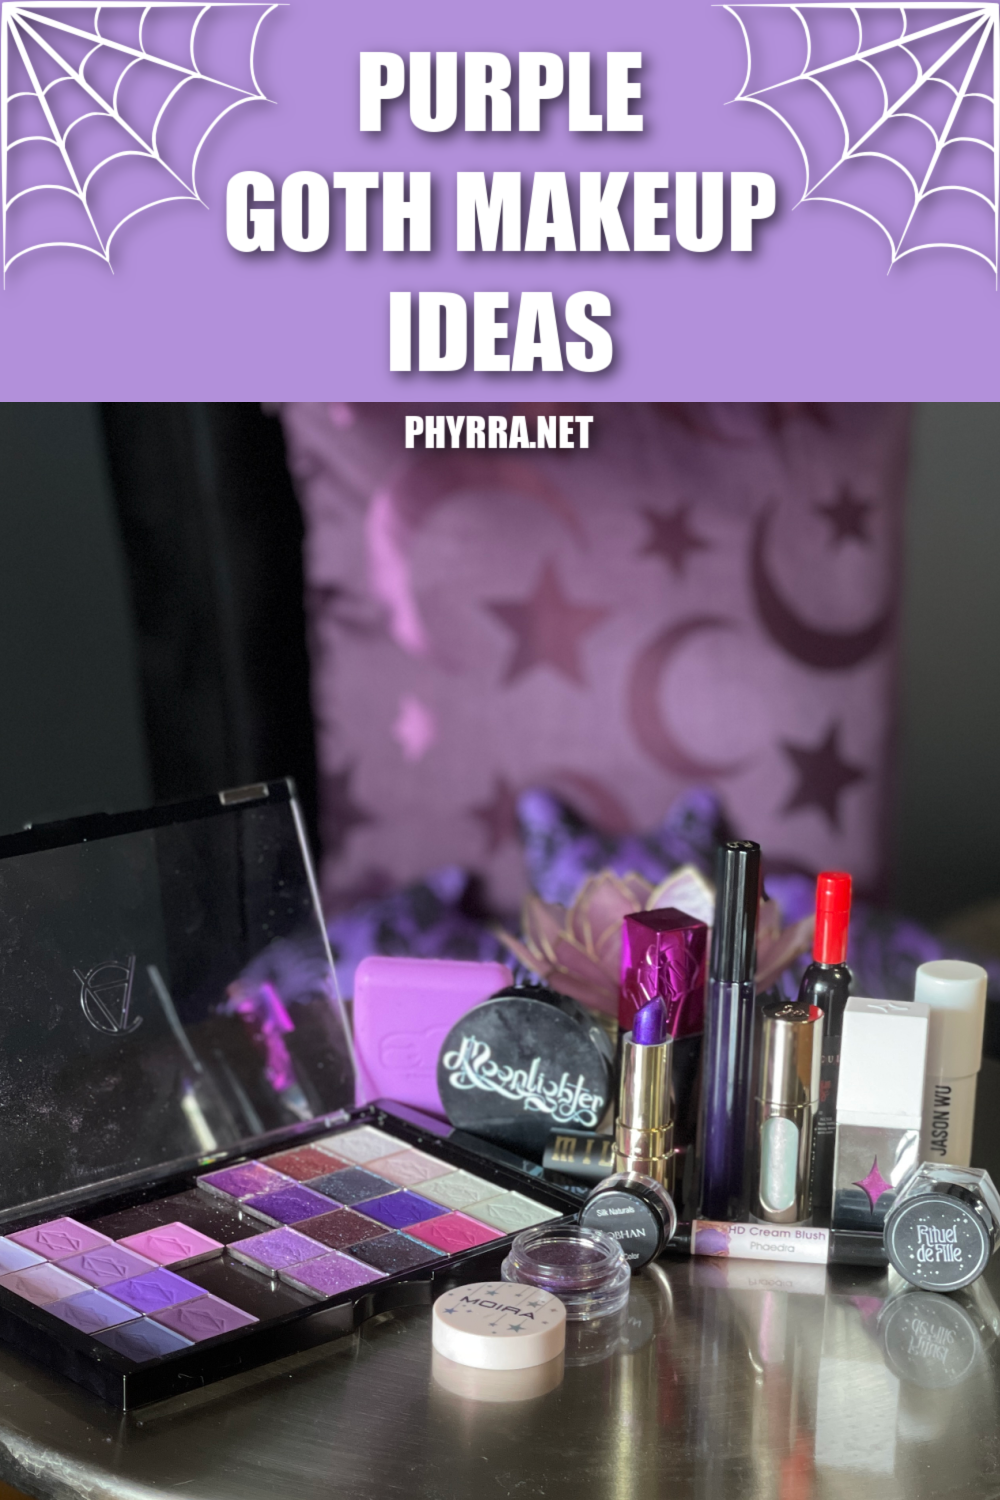 Purple Goth Makeup Ideas and Inspiration